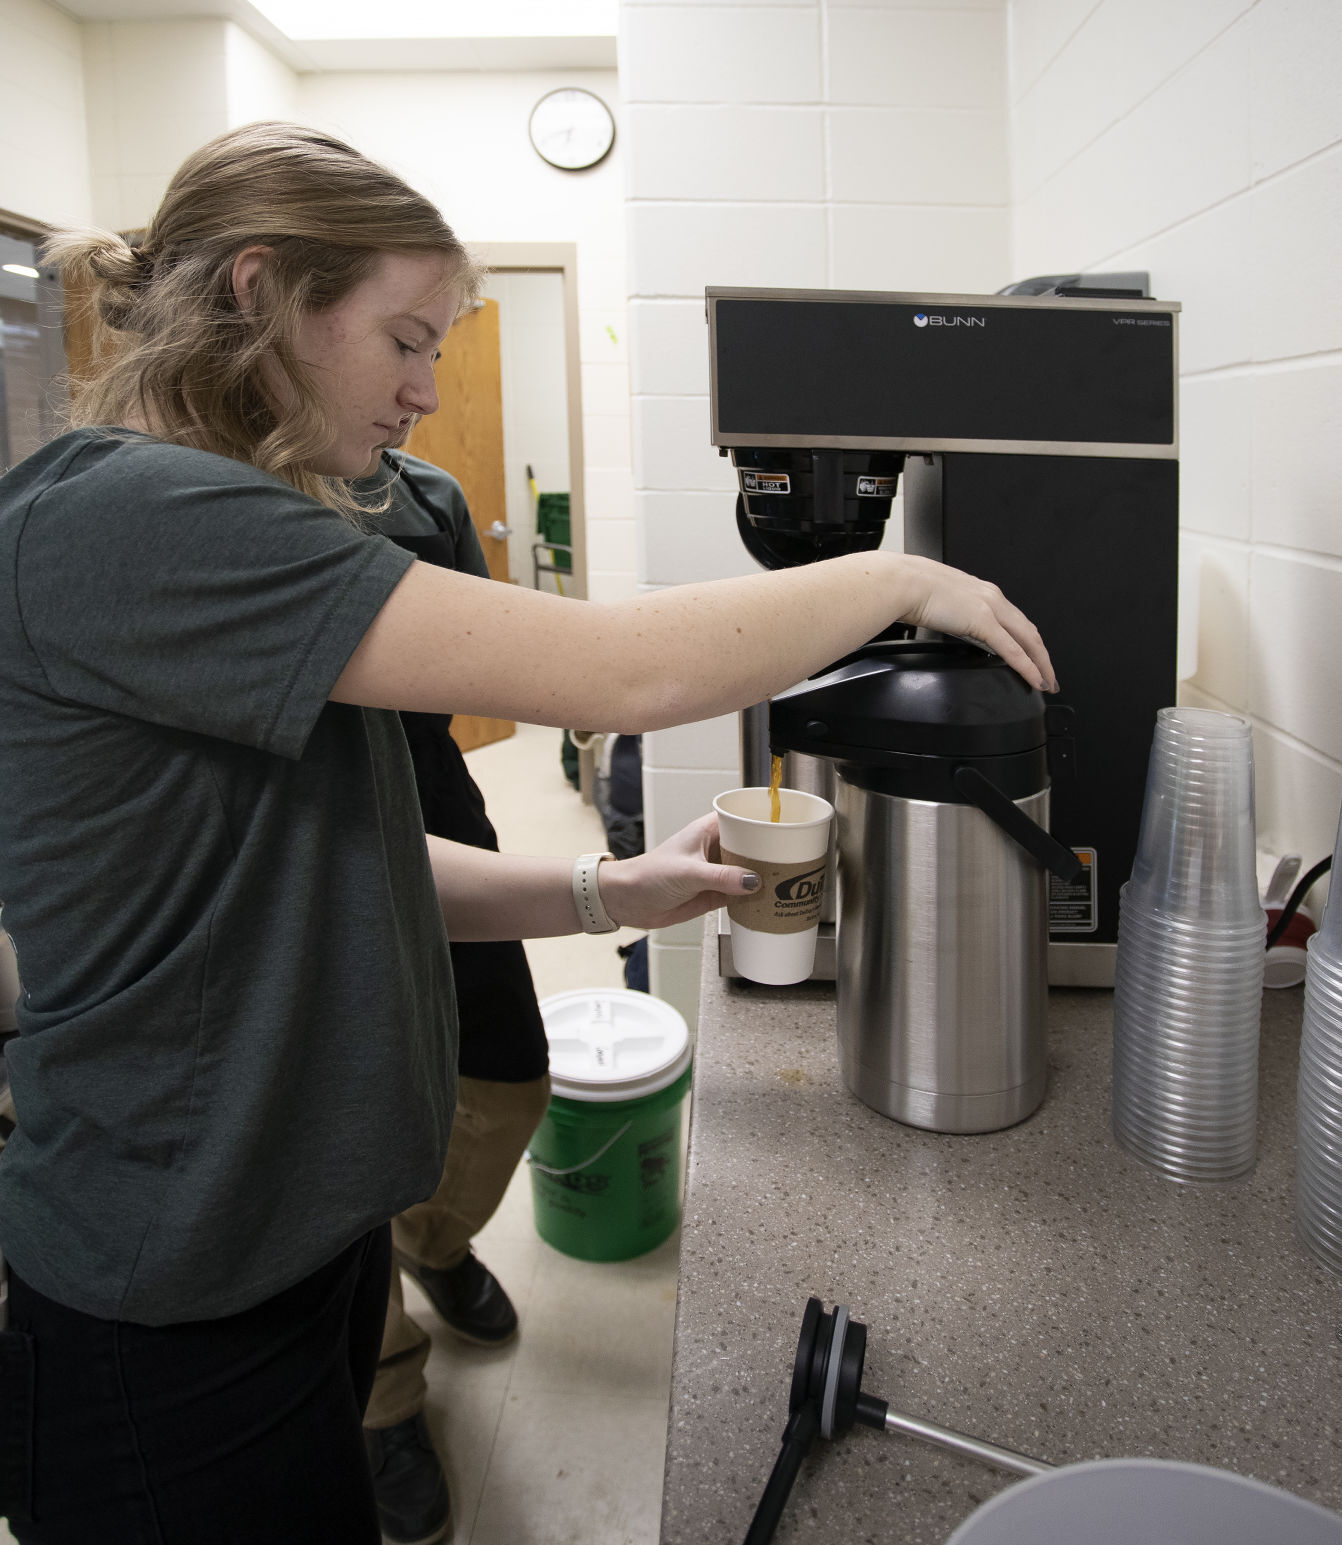 Jamie Vondra, 18, pours a coffee for a customer before school at Wahlert Catholic High School in Dubuque on Wednesday.    PHOTO CREDIT: Stephen Gassman